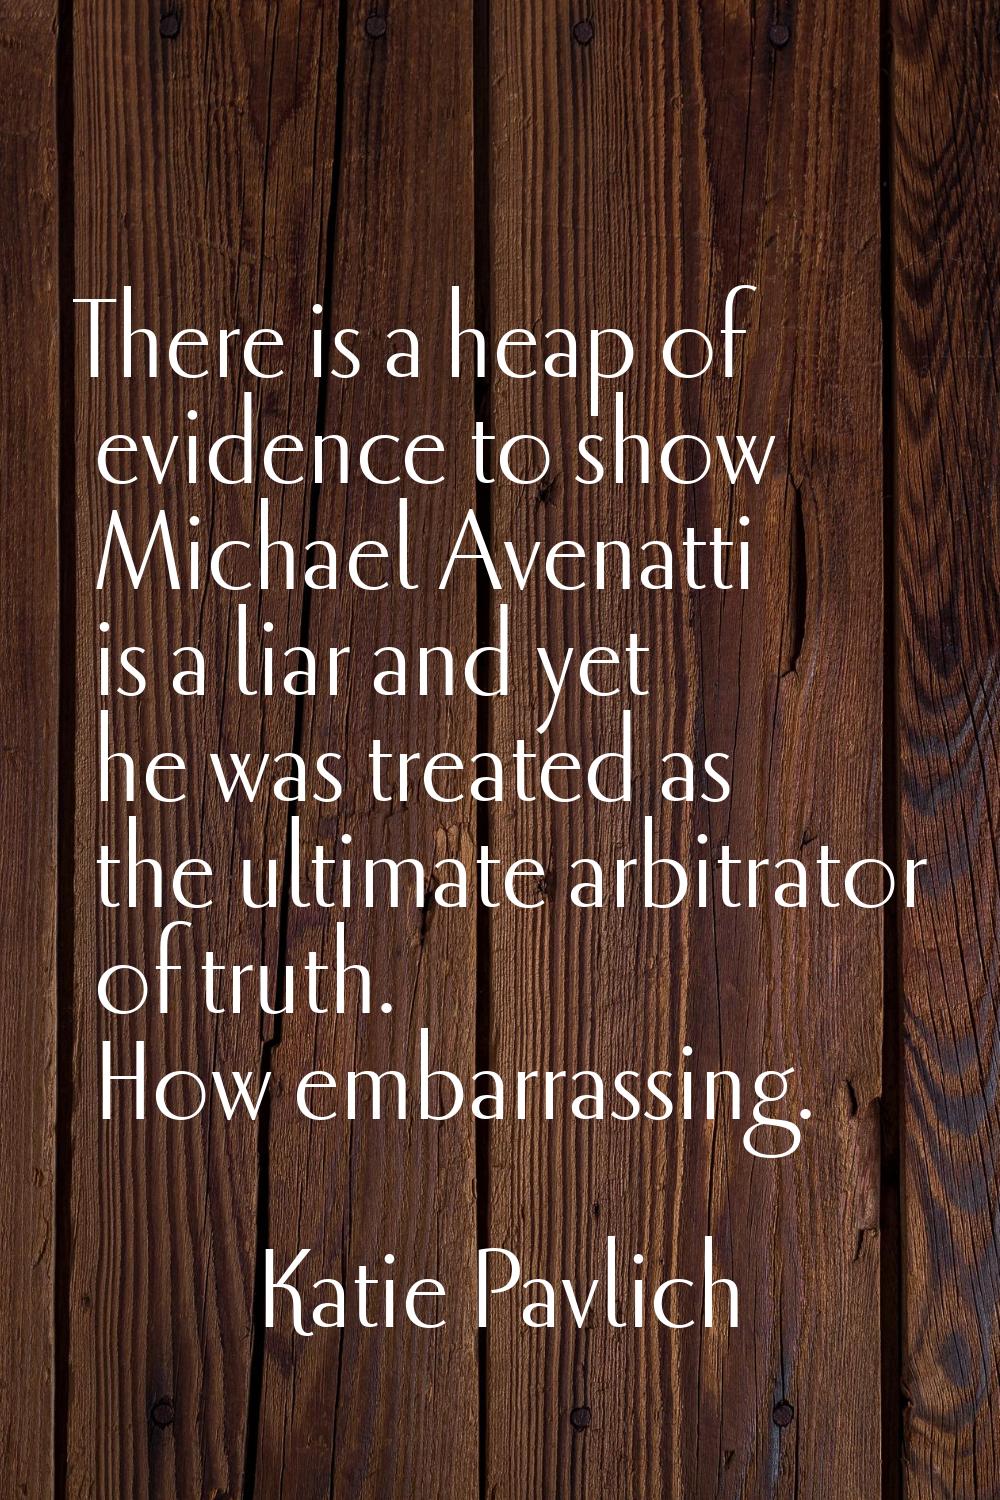 There is a heap of evidence to show Michael Avenatti is a liar and yet he was treated as the ultima